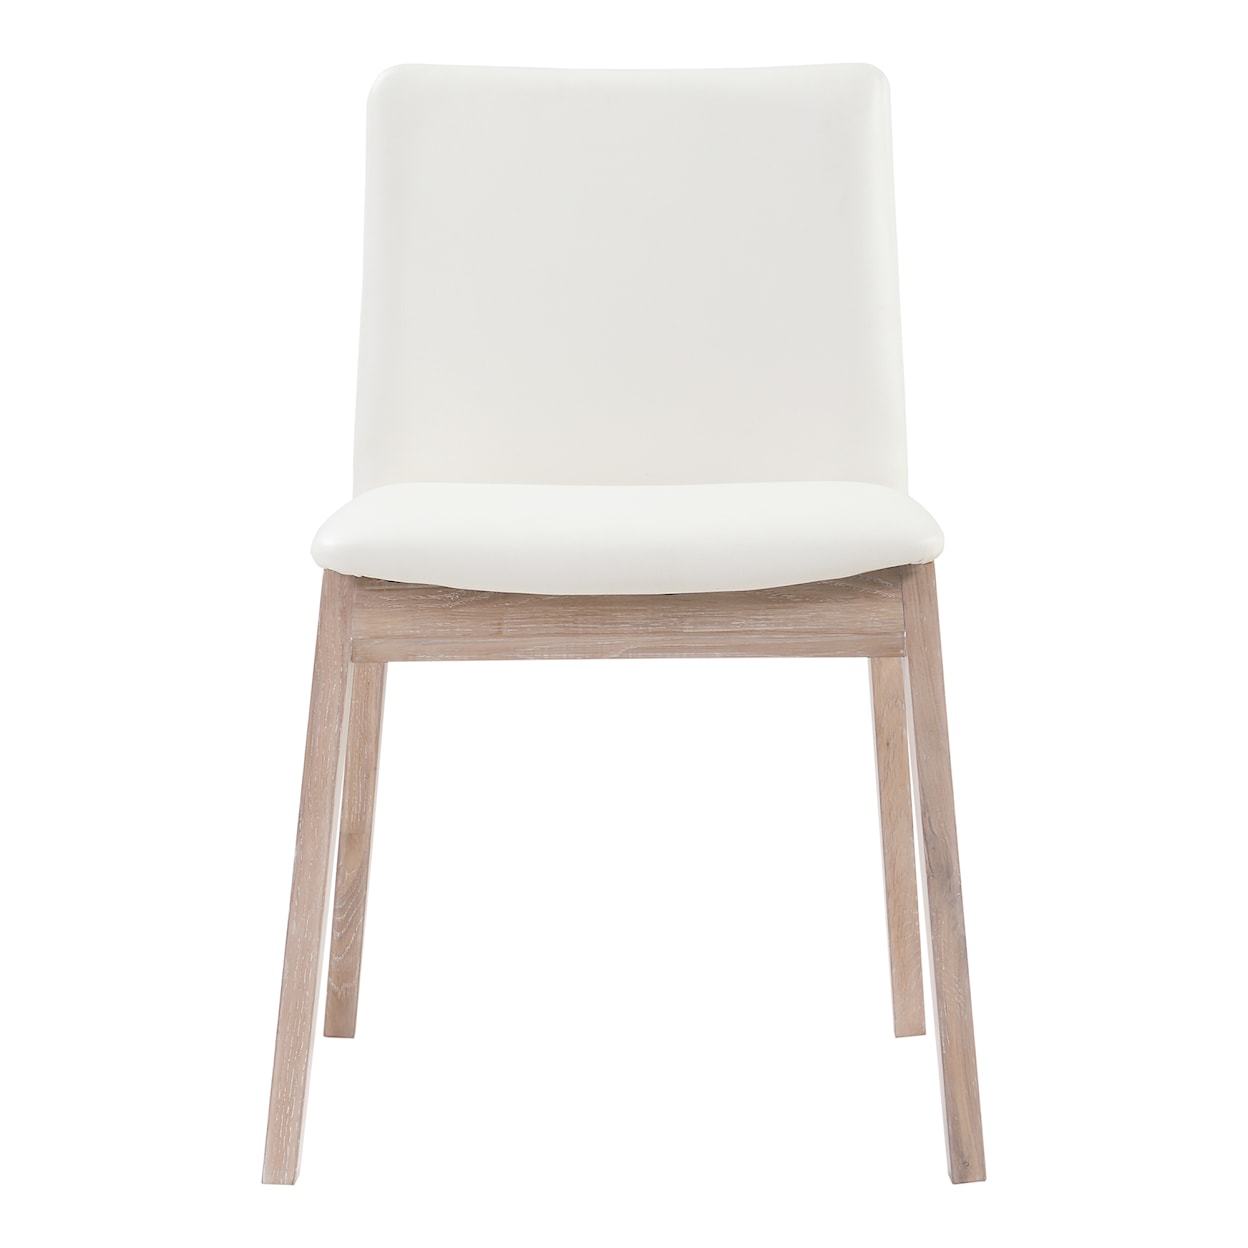 Moe's Home Collection Deco Deco Oak Dining Chair White Pvc-M2